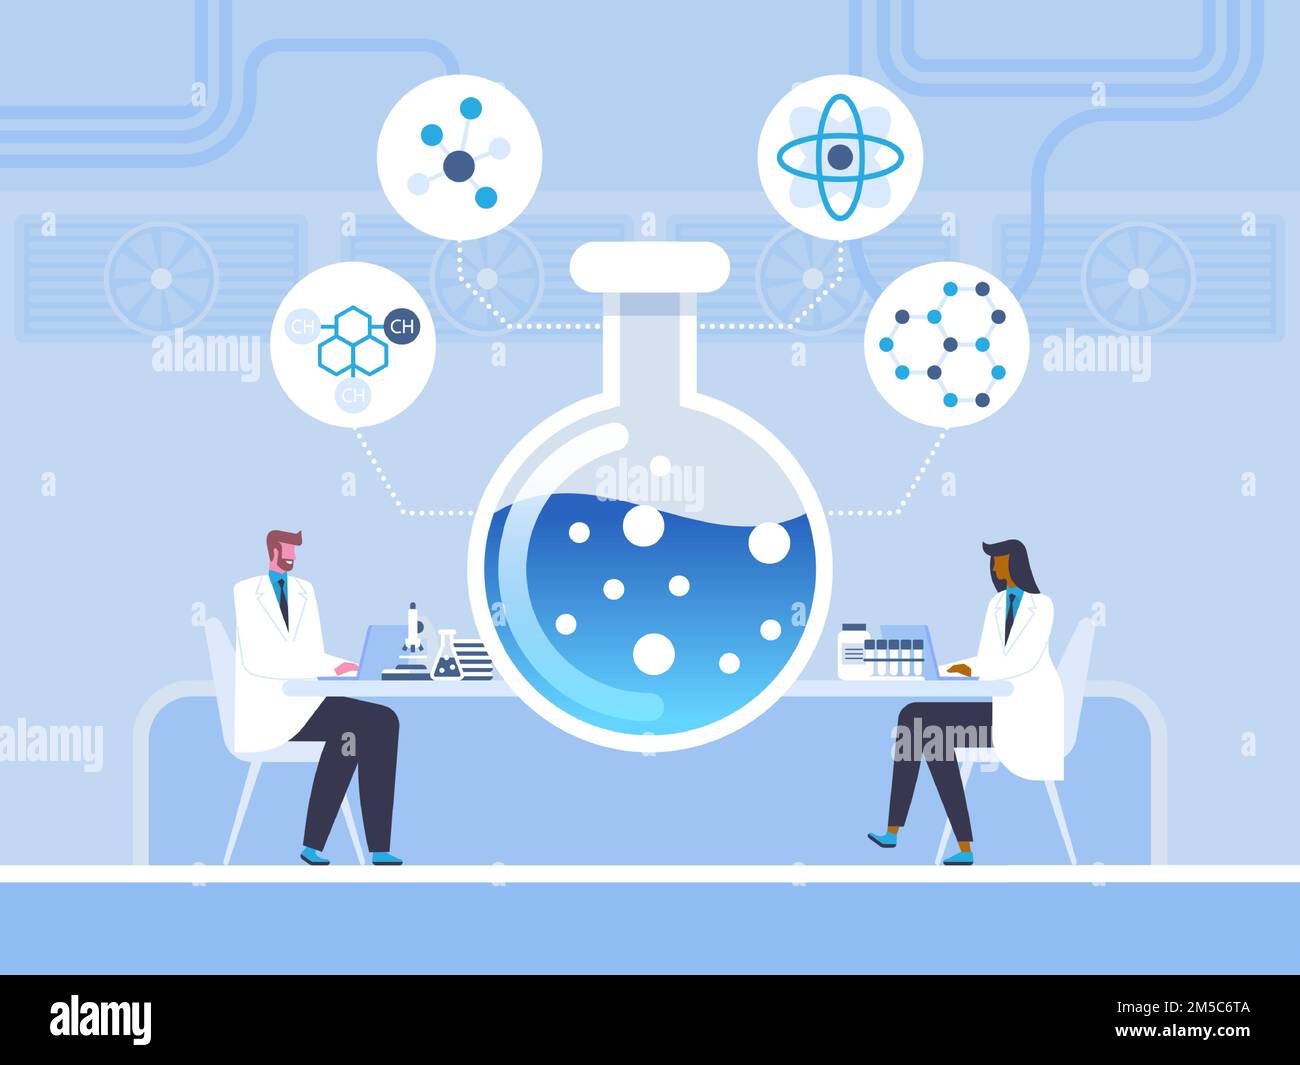 Biochemistry, chemical study vector illustration. Doctors, scientists with laptops cartoon characters. Pharmaceutical company lab, medical experiment. Stock Vector